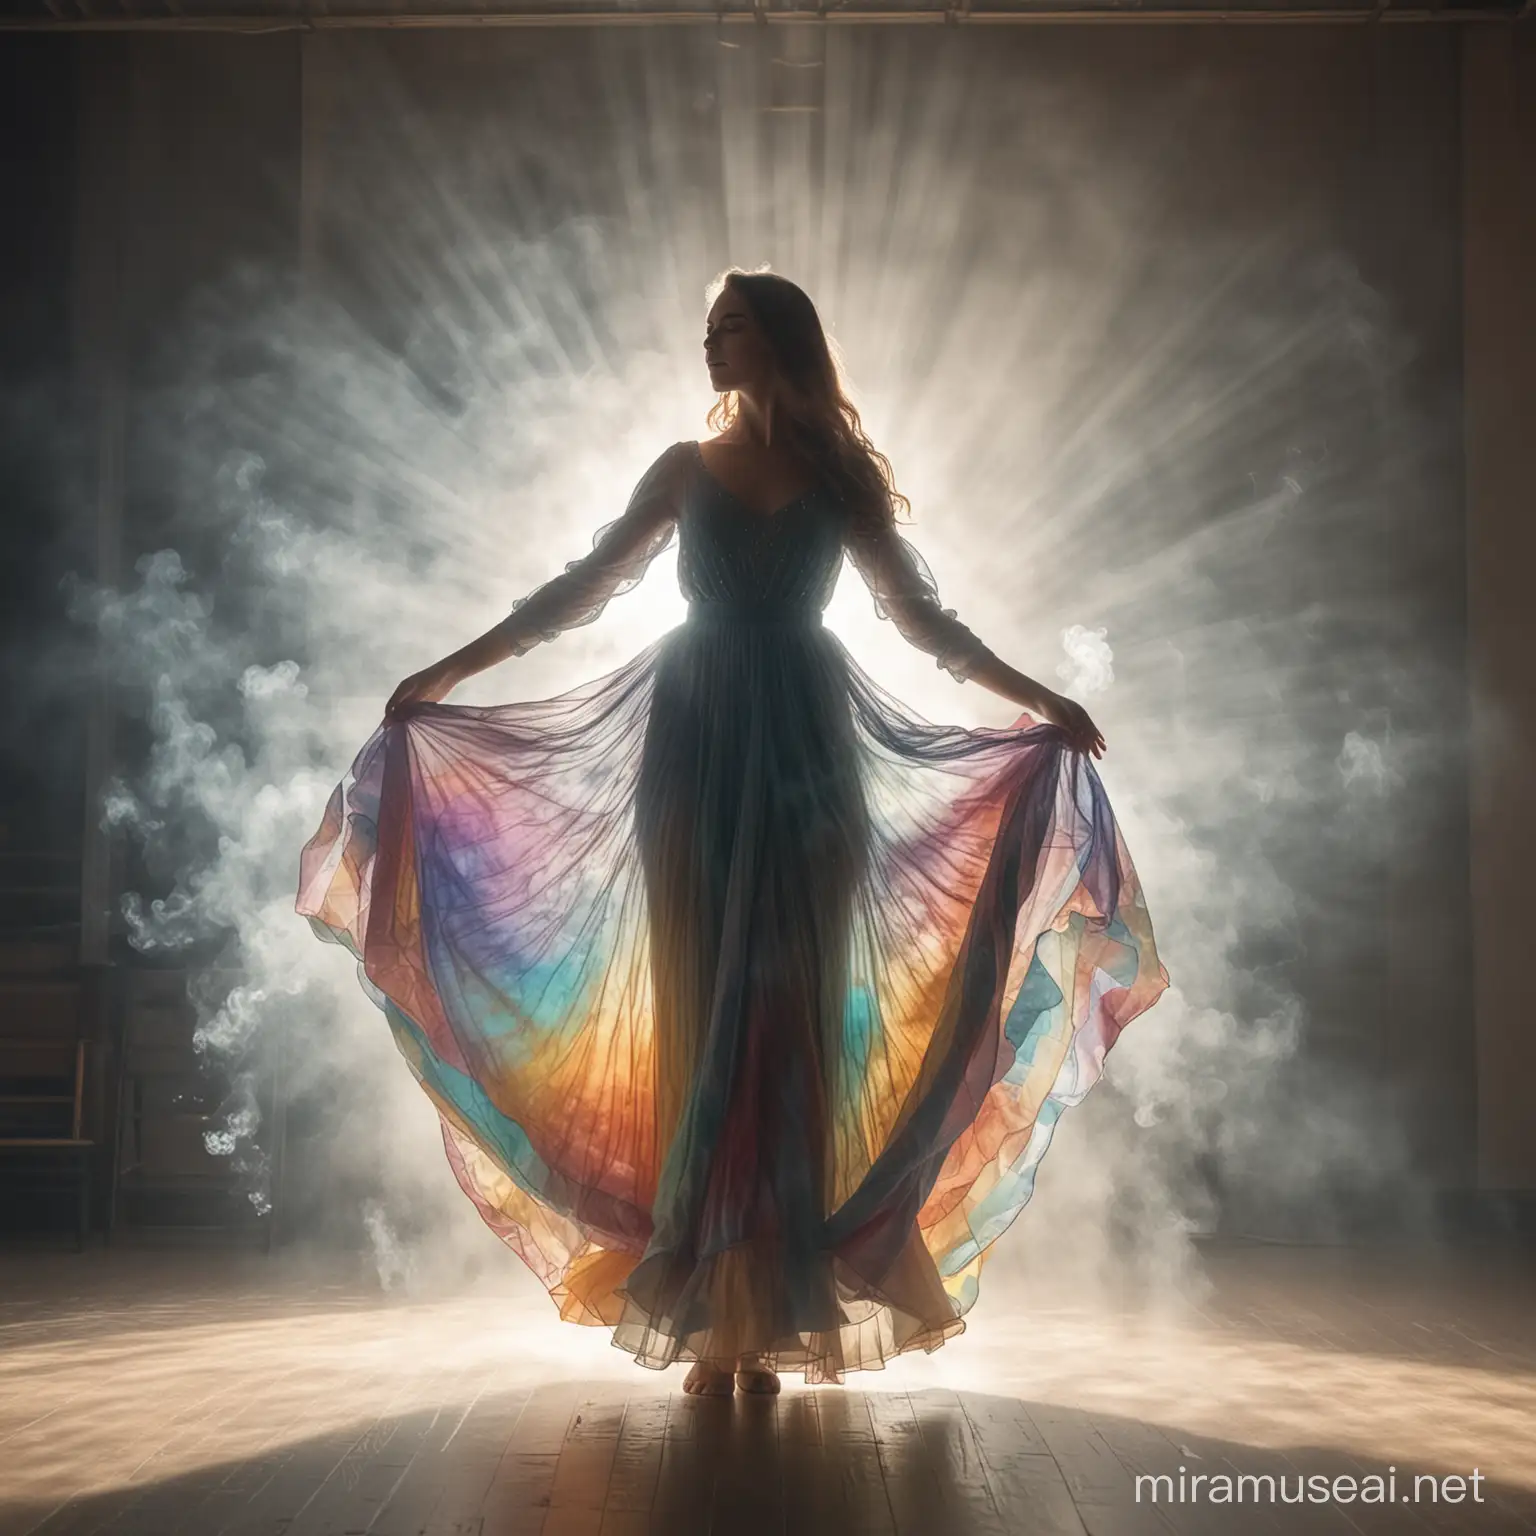 Young Woman Dancing in Long Dress with Prismatic Color Effects